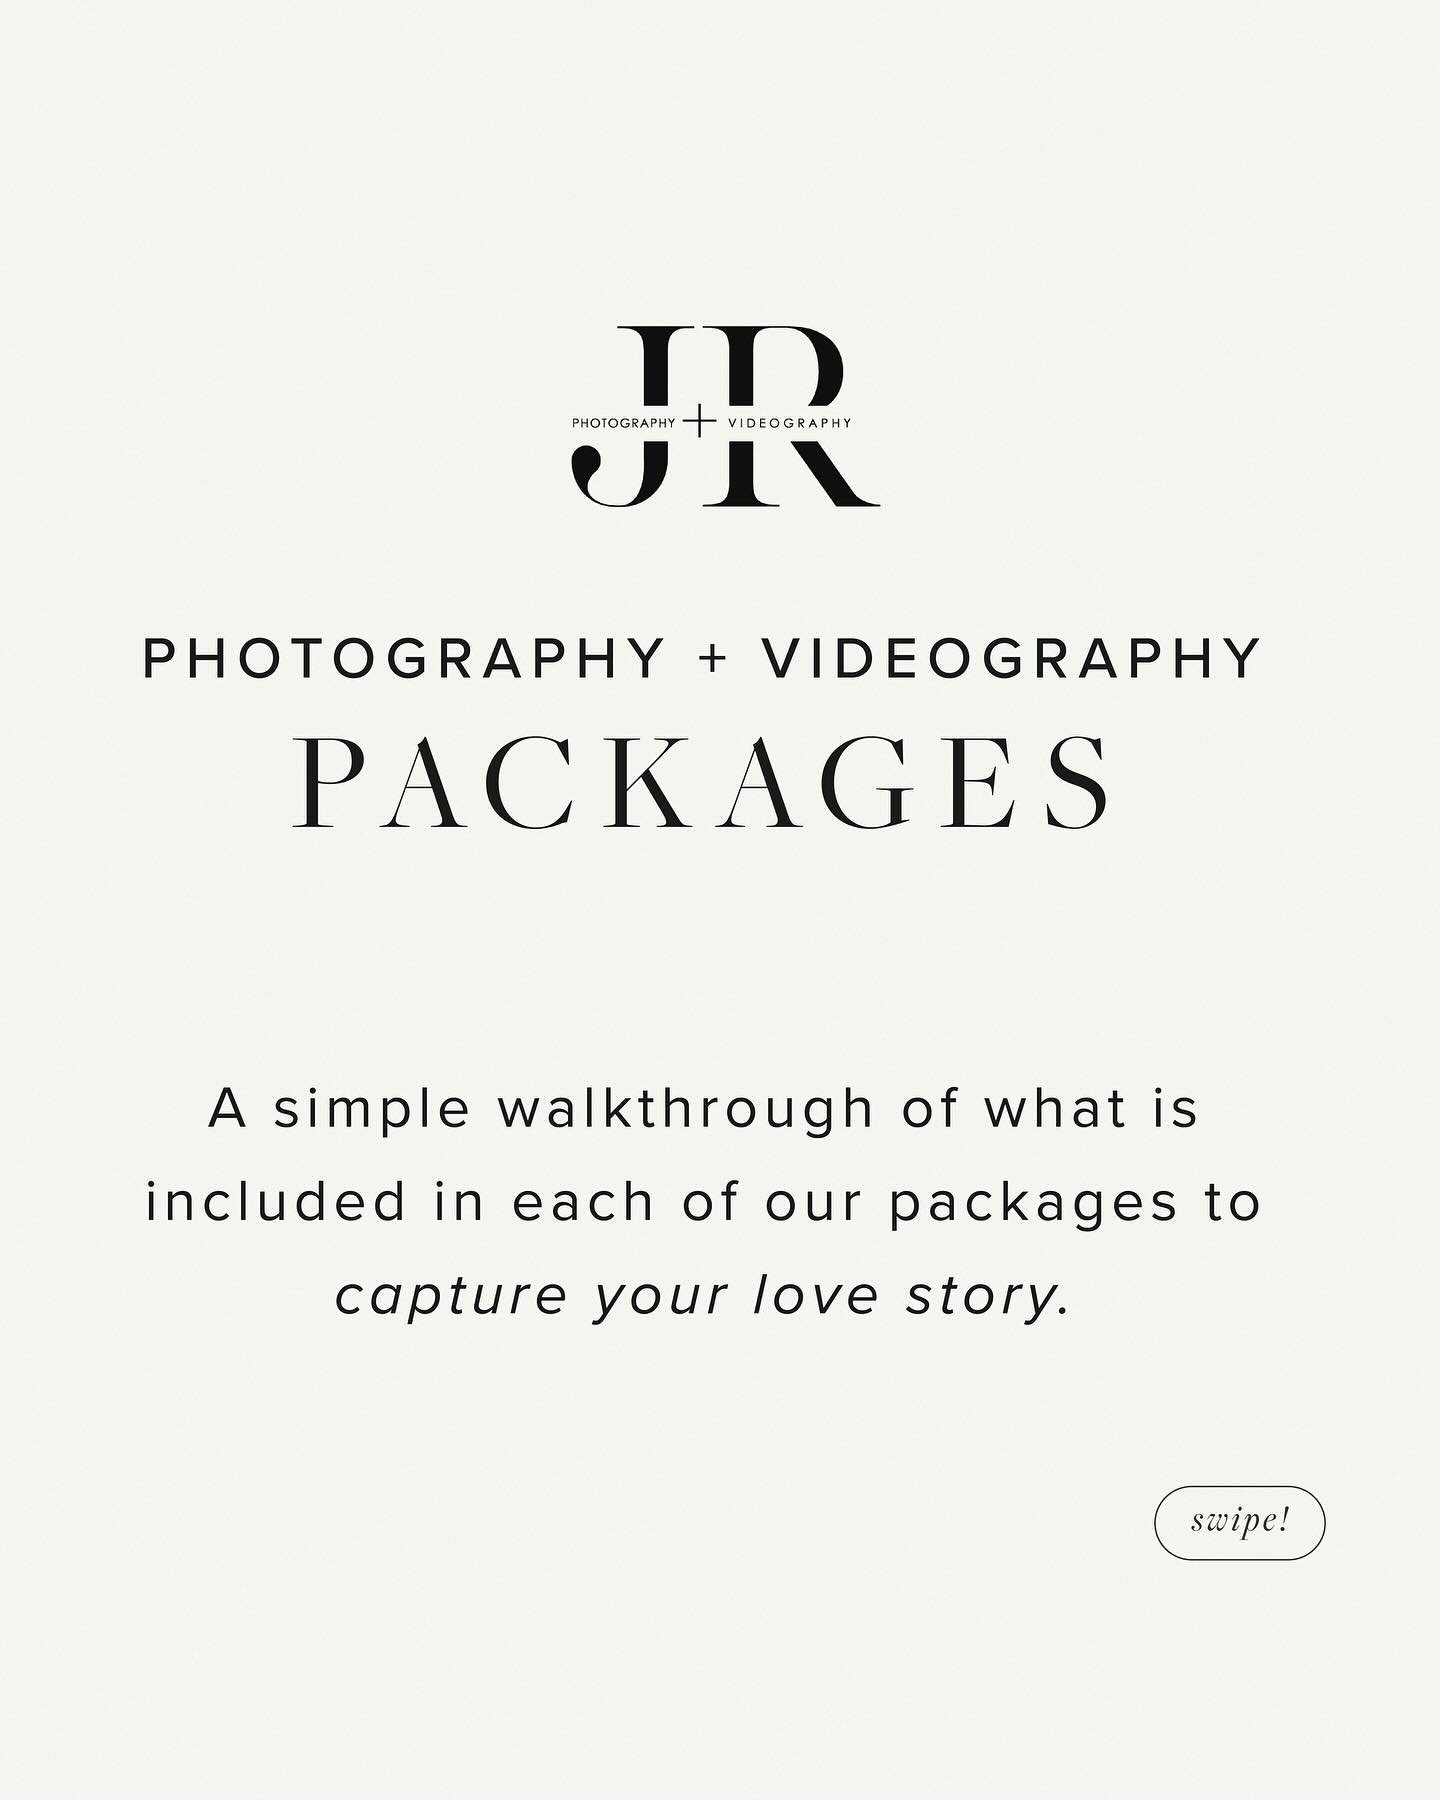 What makes JR Captures different from other wedding professionals? We are able to provide both photography and videography services under one name. Trying to find which photographer and videographer you want can be overwhelming. Make the choice easie